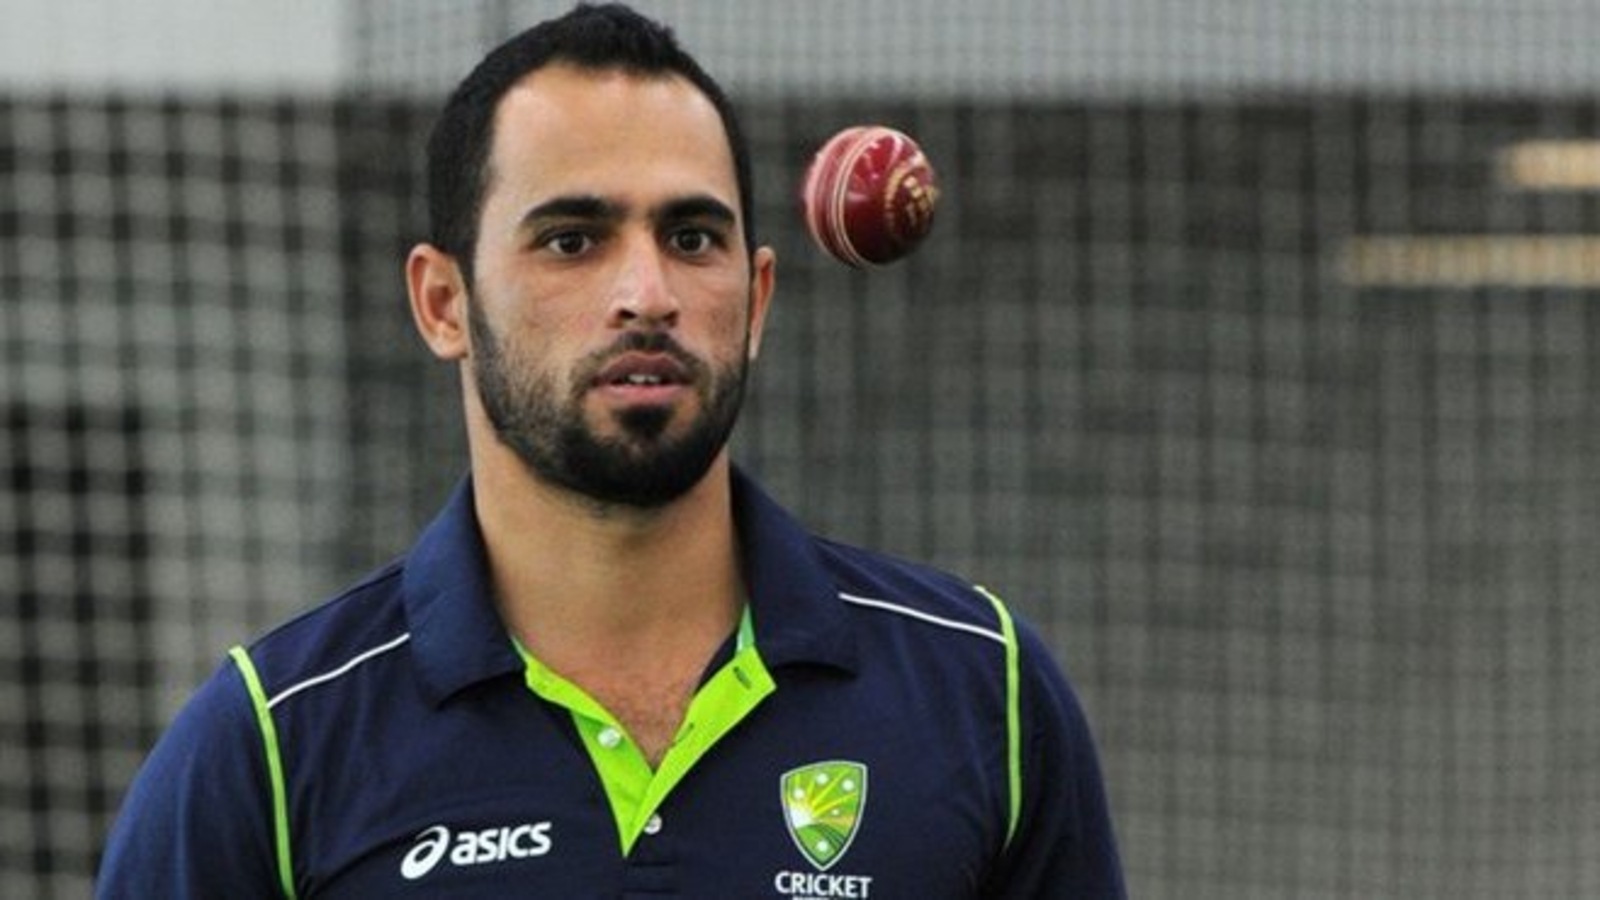 PSL 2021 Match postponed after Fawad Ahmed tests positive for COVID-19 Cricket